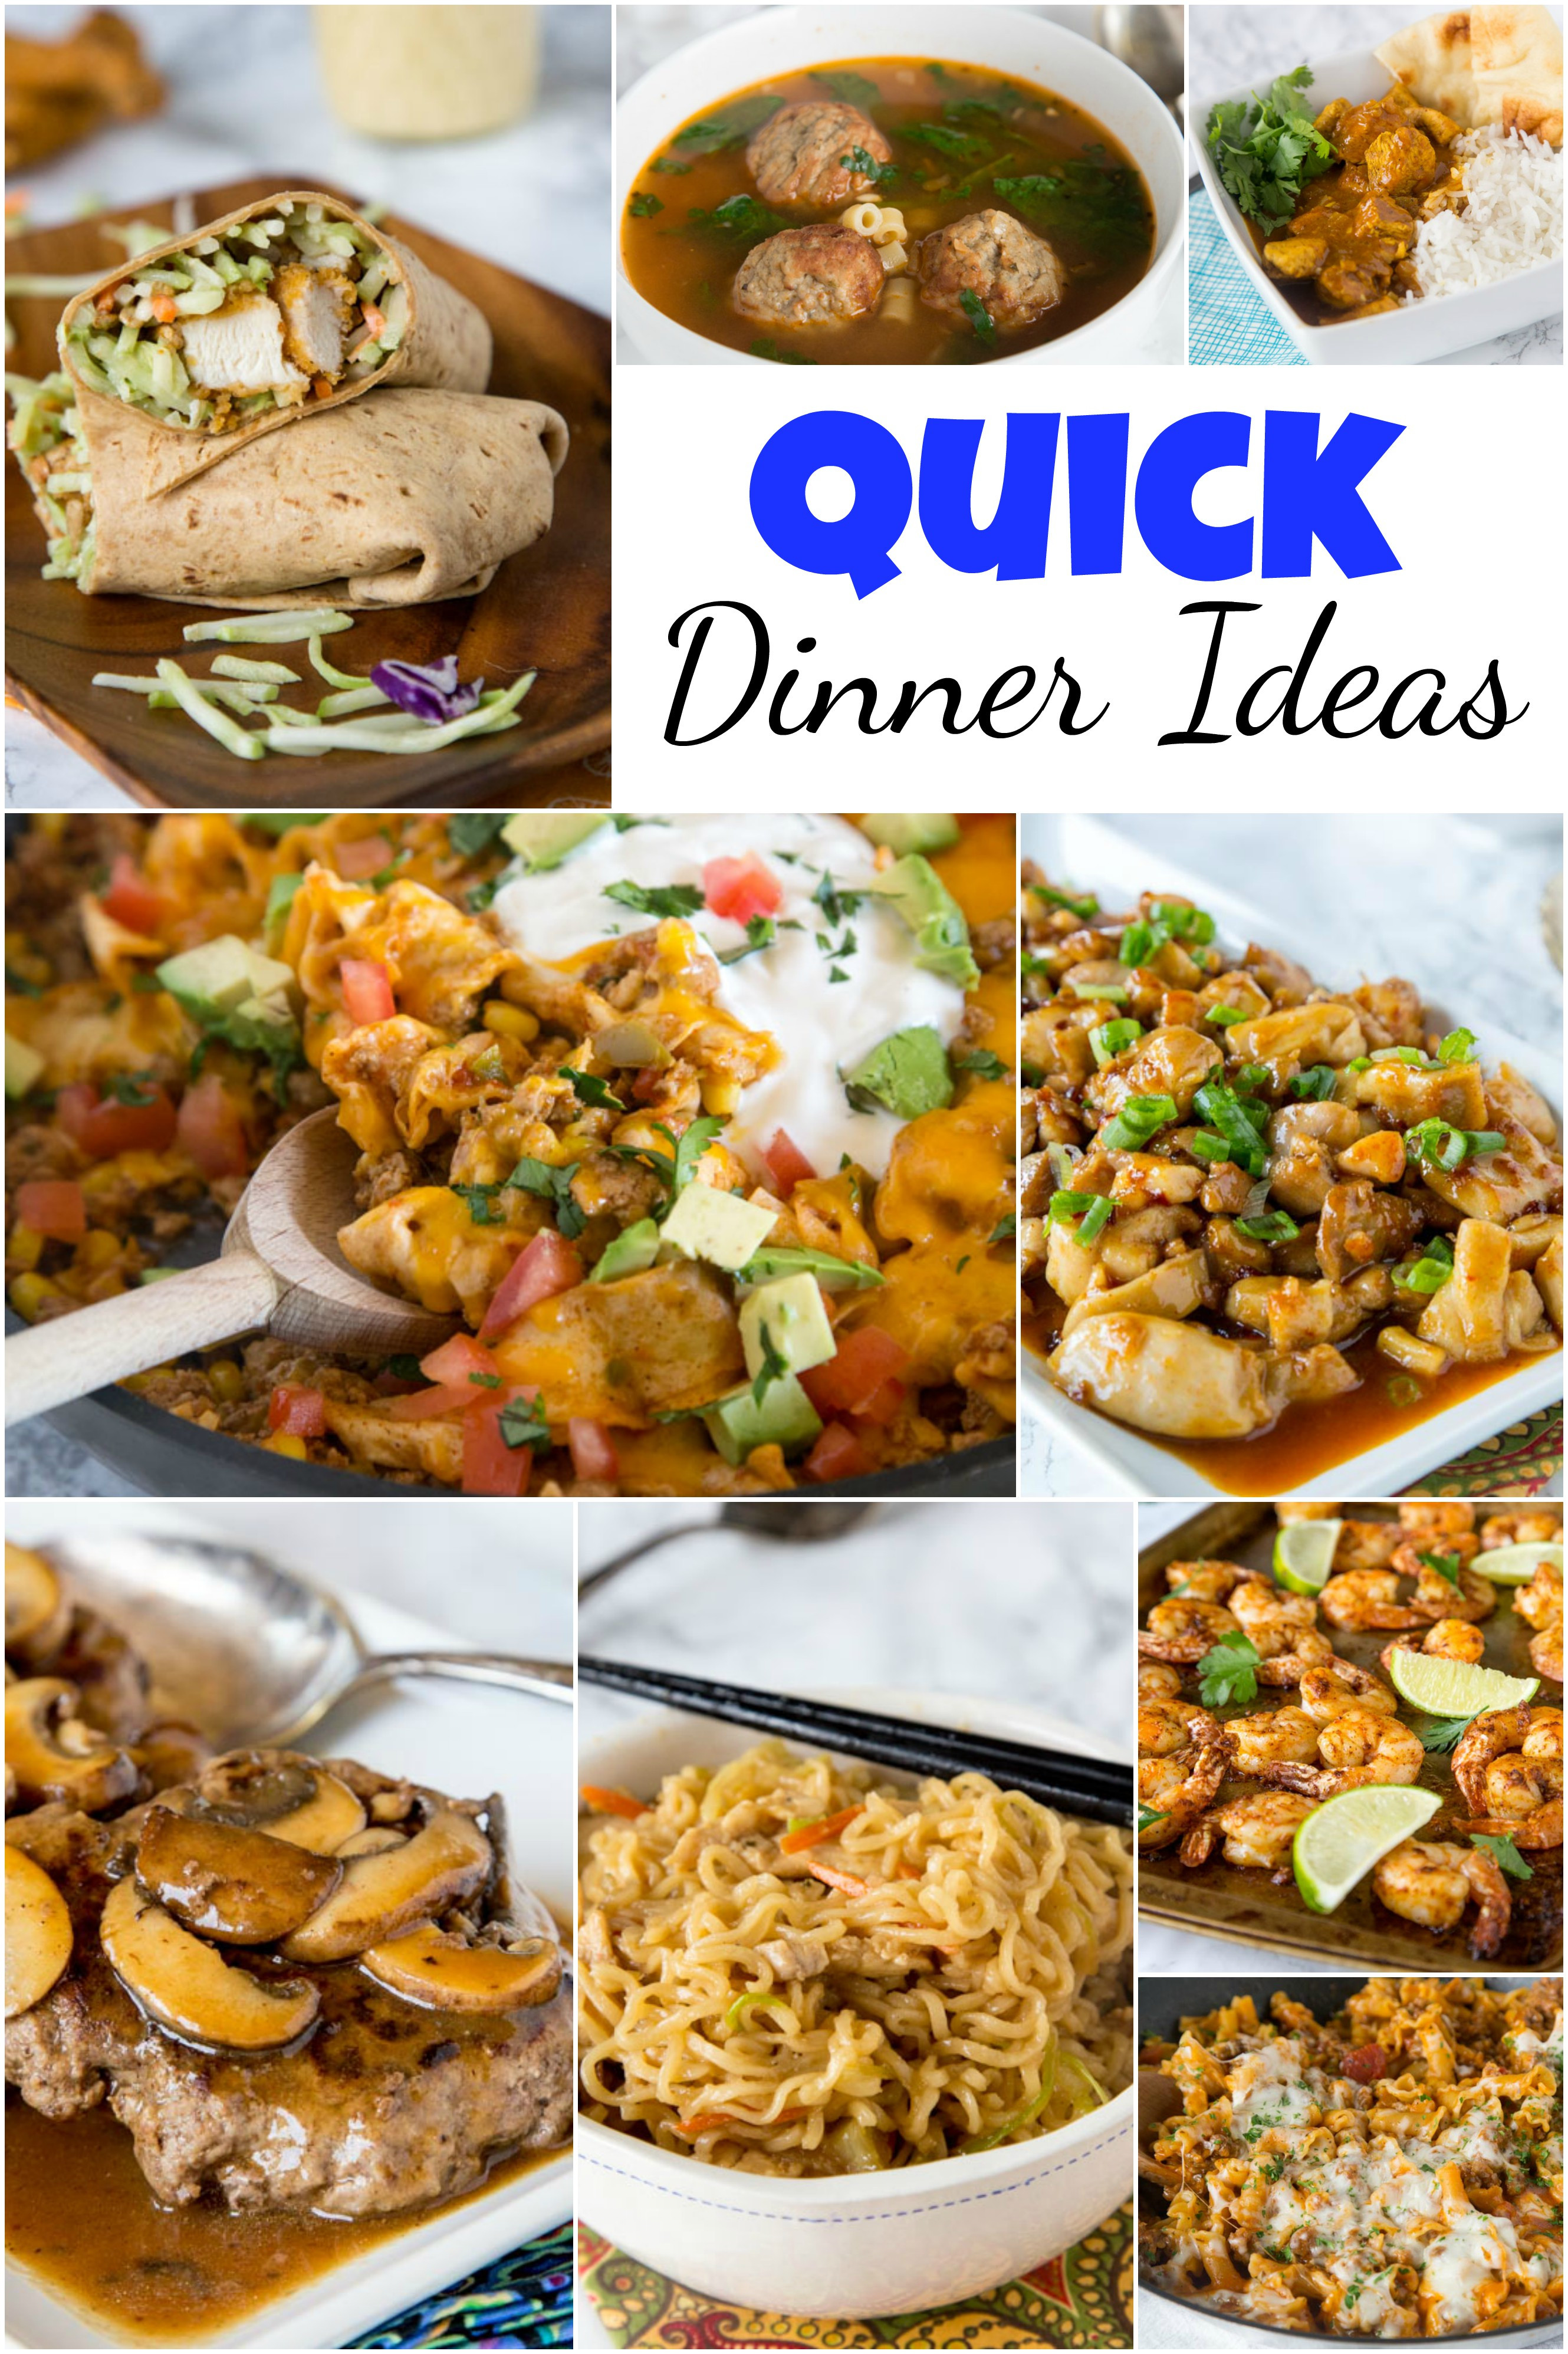 Fast Easy Dinner Recipies Quick Dinner Ideas Dinners Dishes and Desserts